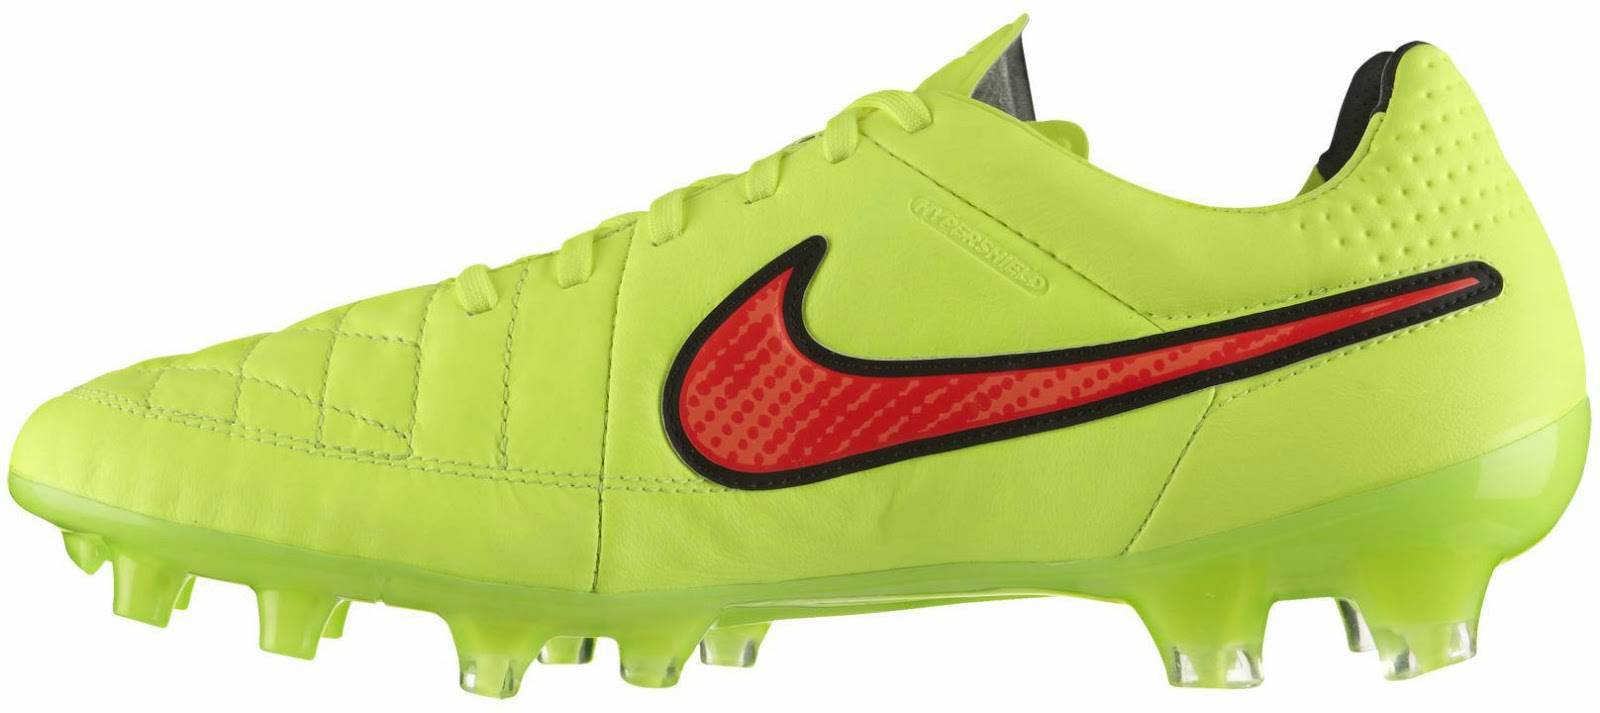 old nike tiempo boots